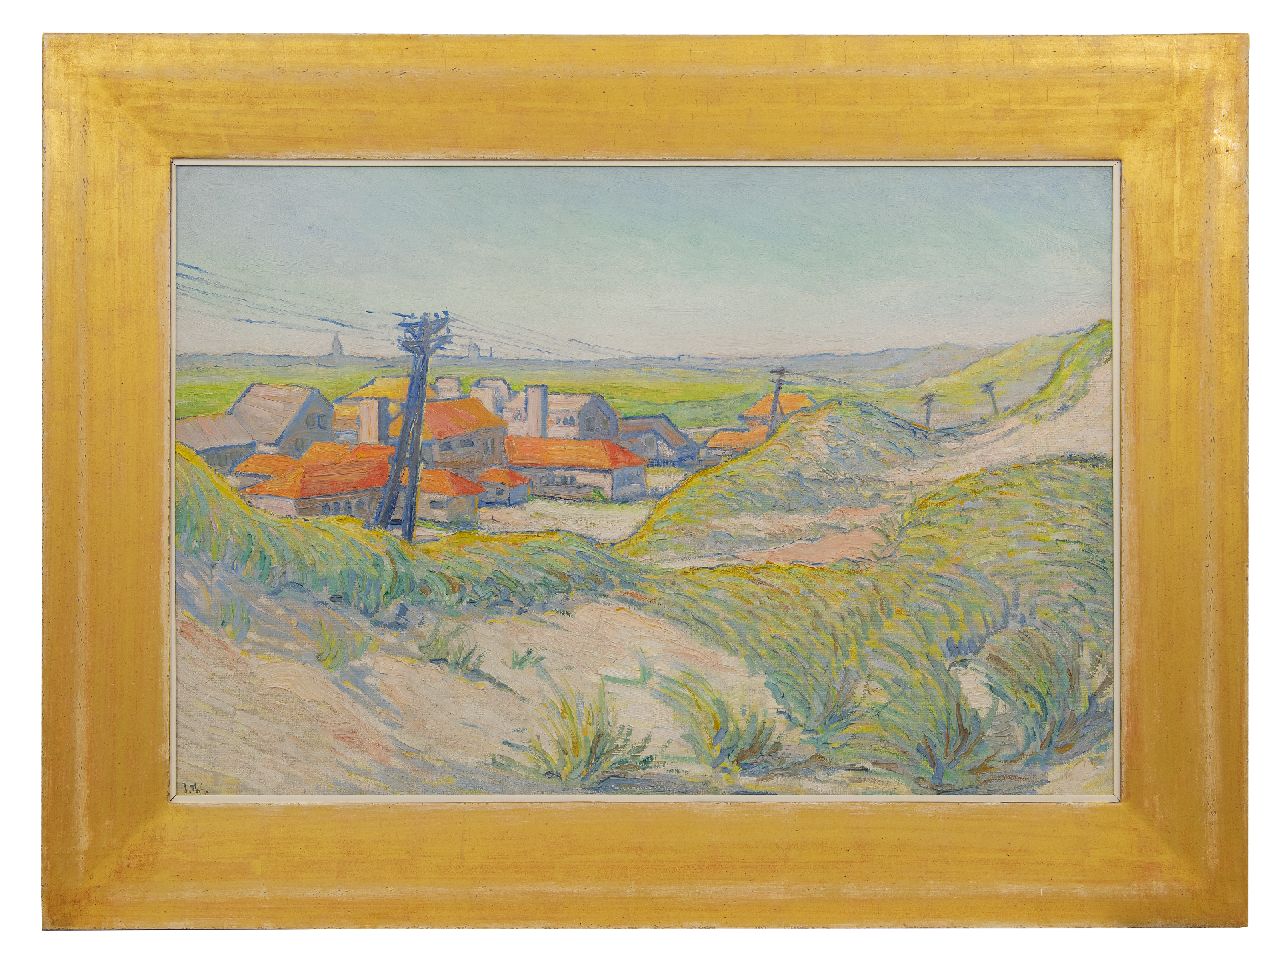 Giesen J.Th.  | Johannes Theodorus 'Jan' Giesen, Houses behind the dunes, oil on canvas 65.0 x 95.2 cm, signed l.l. with initials and on stretcher in full and dated '24 on stretcher